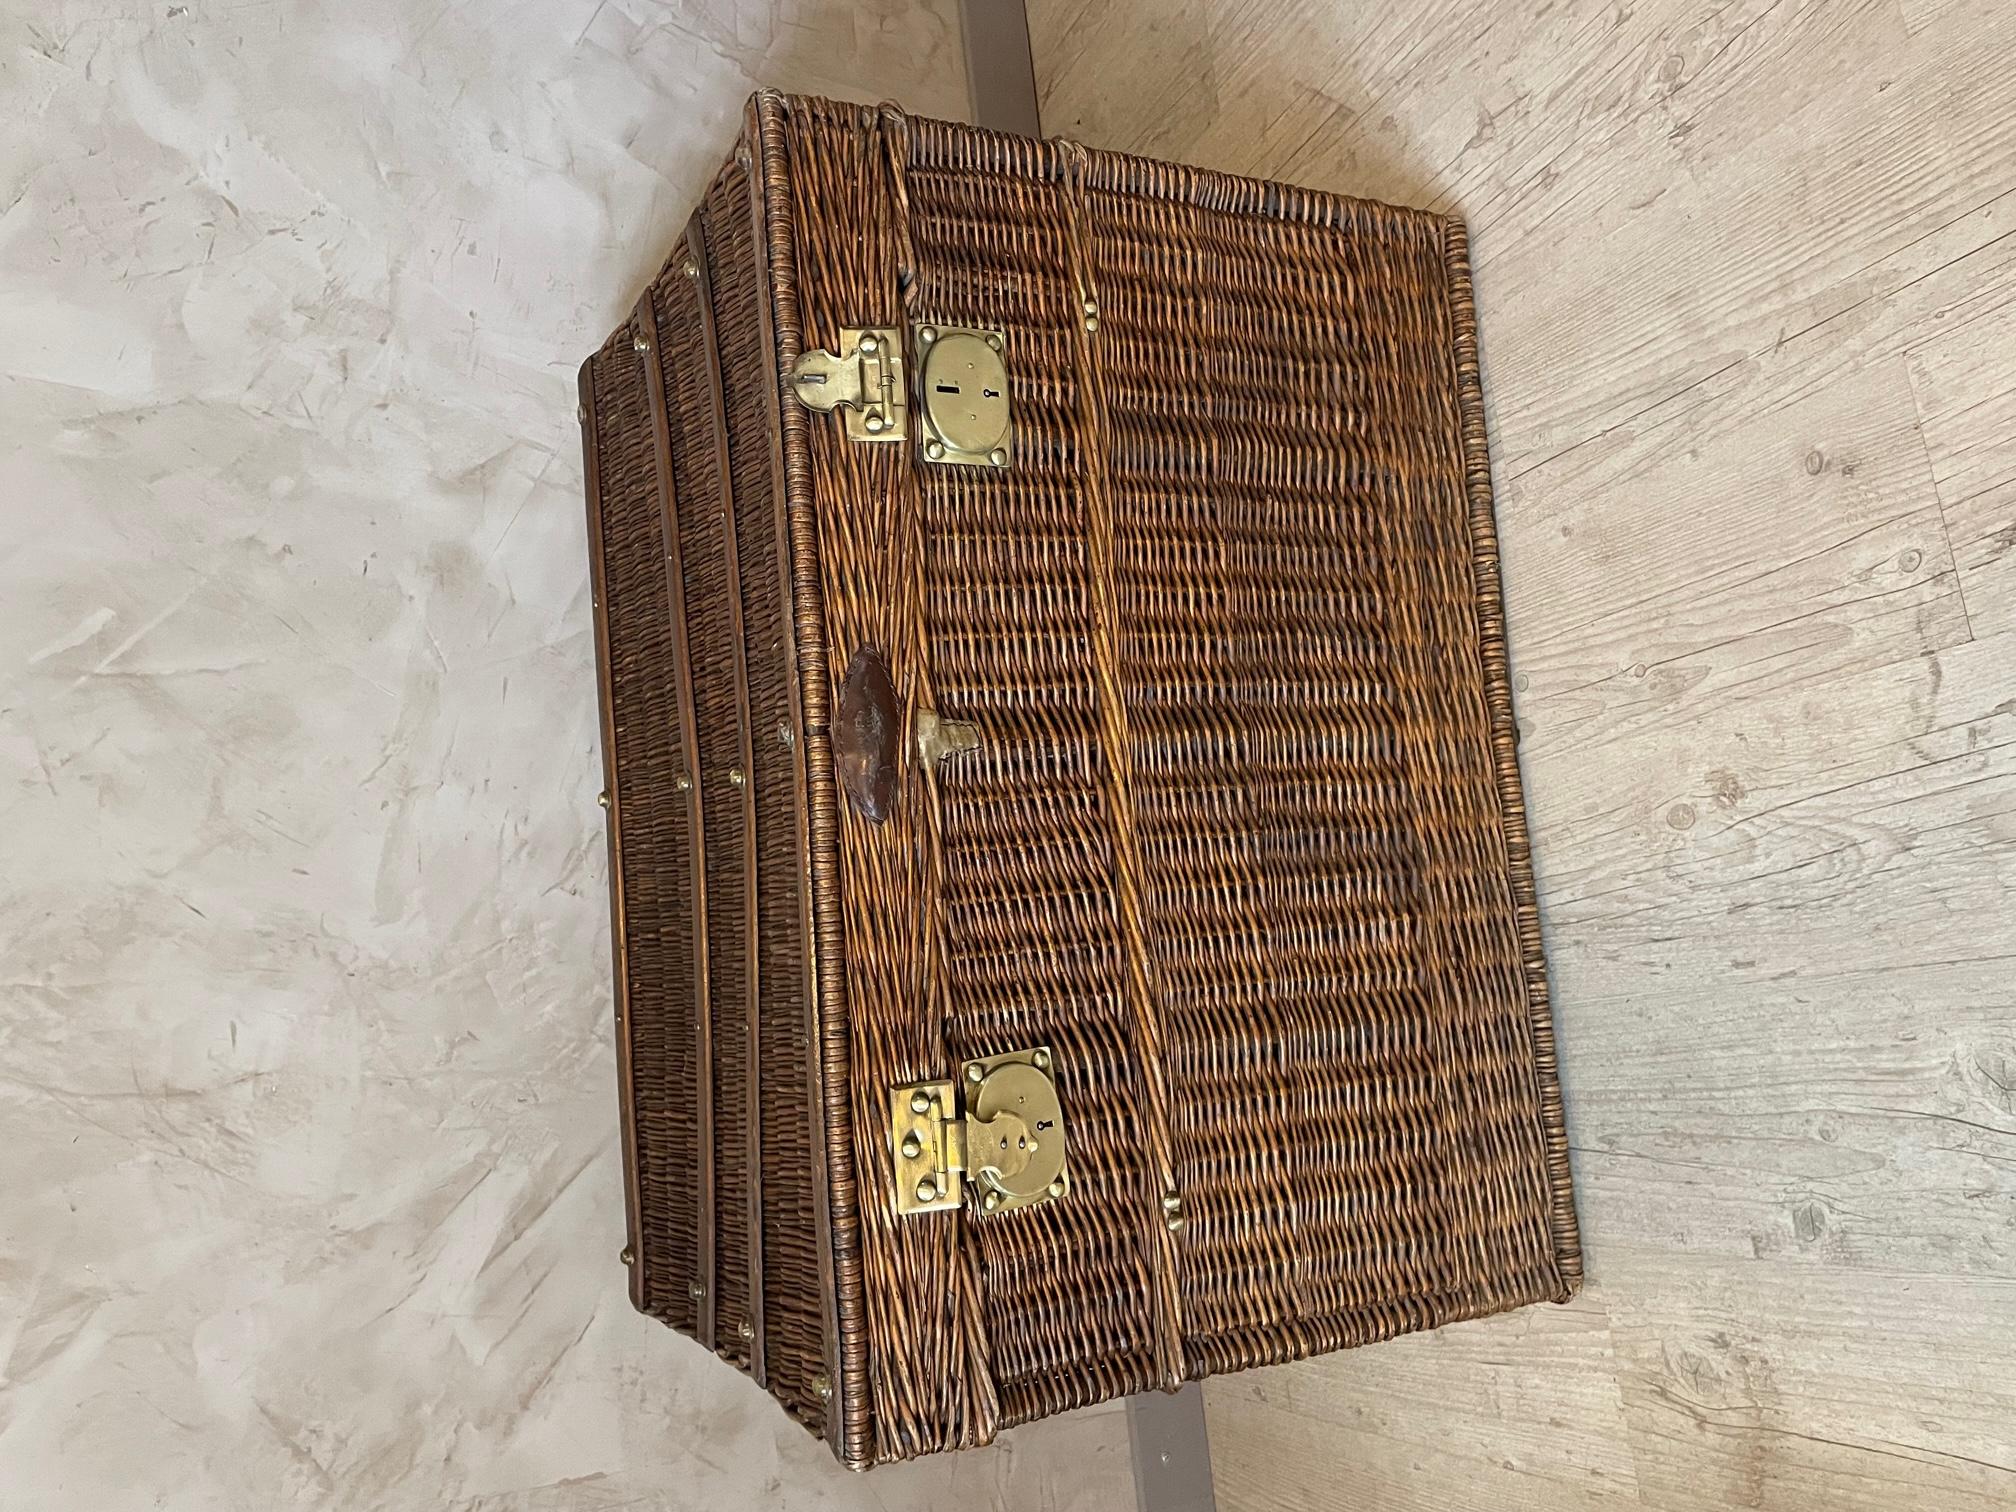 Very nice rattan storage trunk made in France in Lyon by Camus et frères in the 1920s. Hemp interior. Trunk used at the time to keep sheep's wool, therefore very healthy.
Brass fitting with the stamp of the Lyonnais manufacturer.
Handle on each